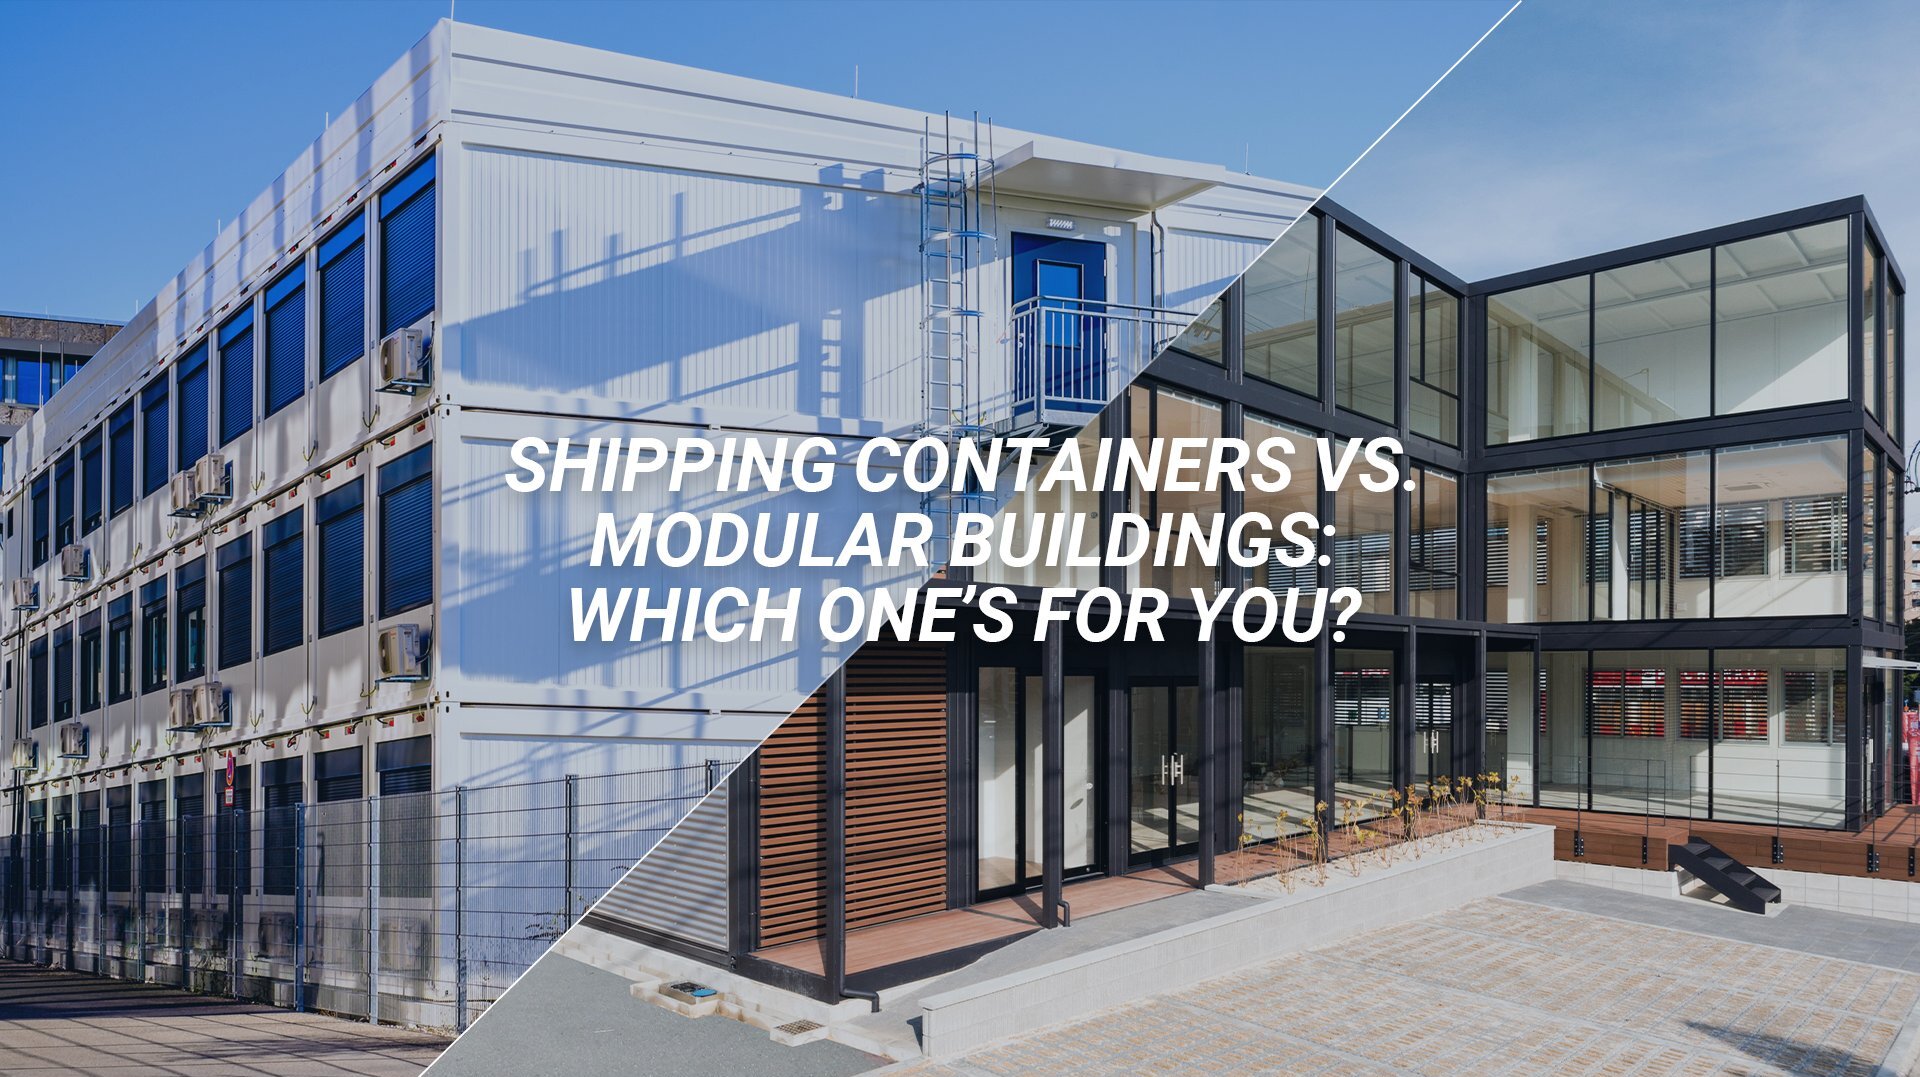 Shipping Containers vs. Modular Buildings: Which one’s for you?